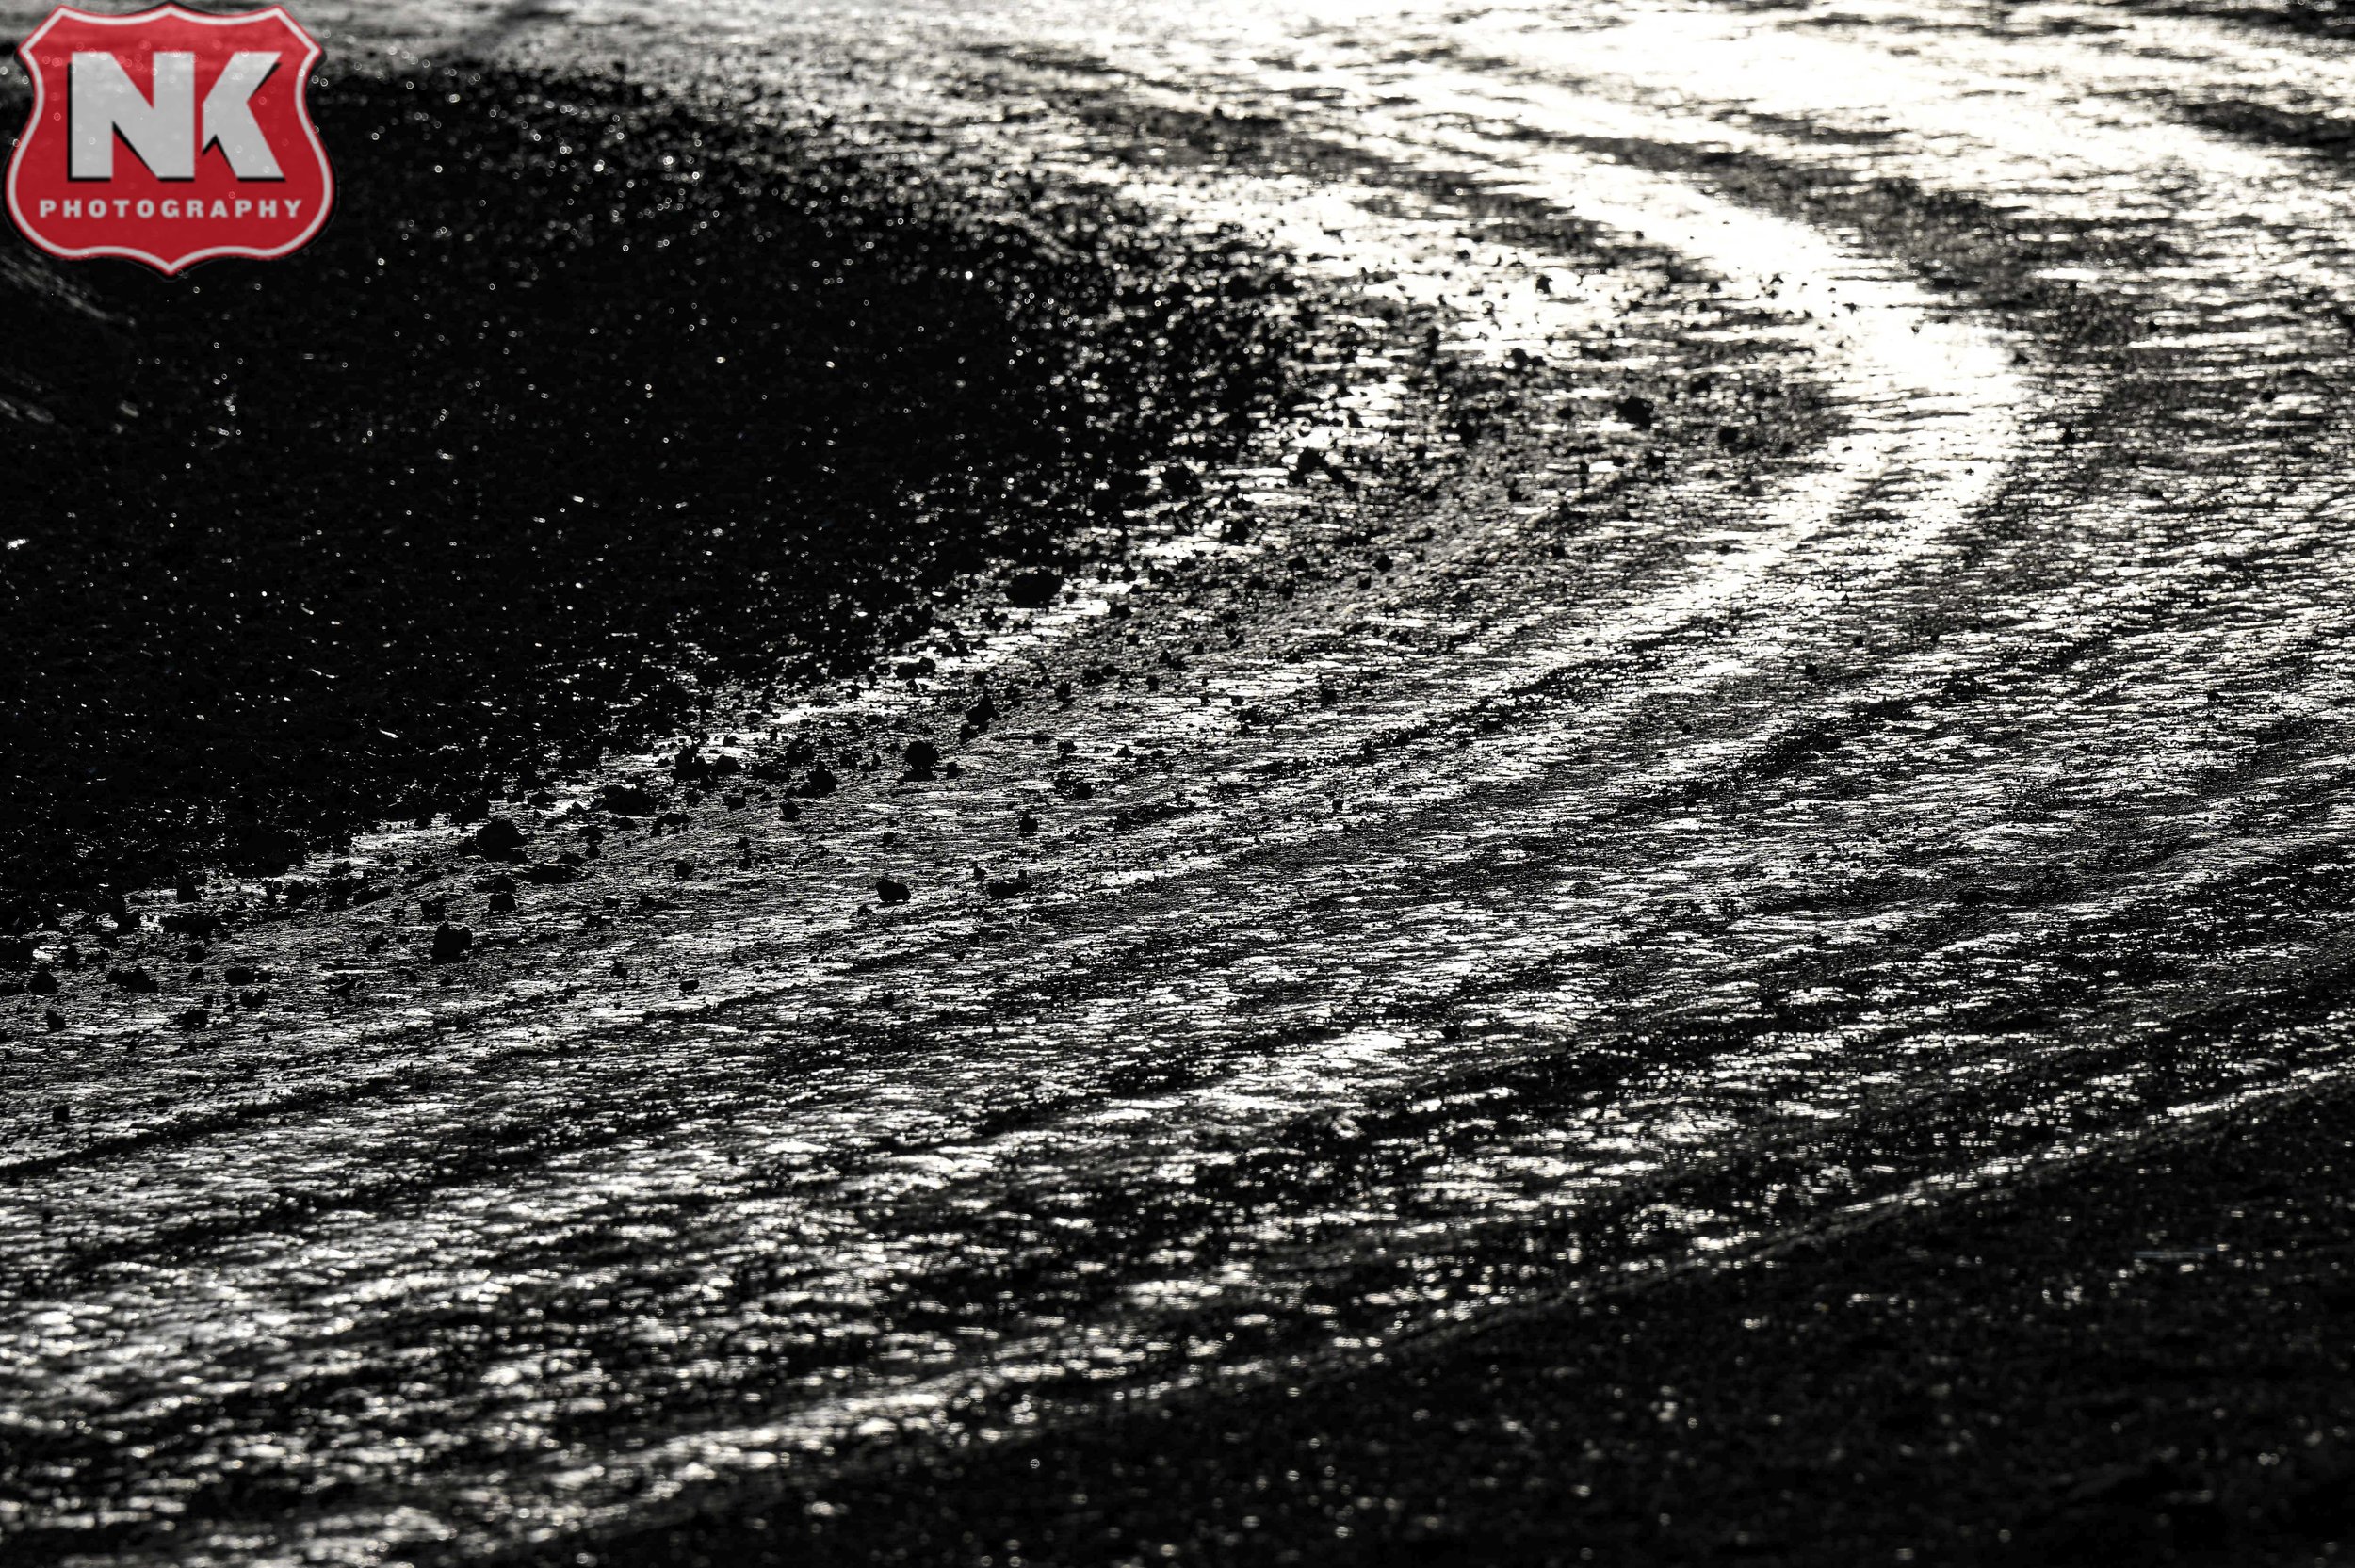 Dirt-track general view - texture